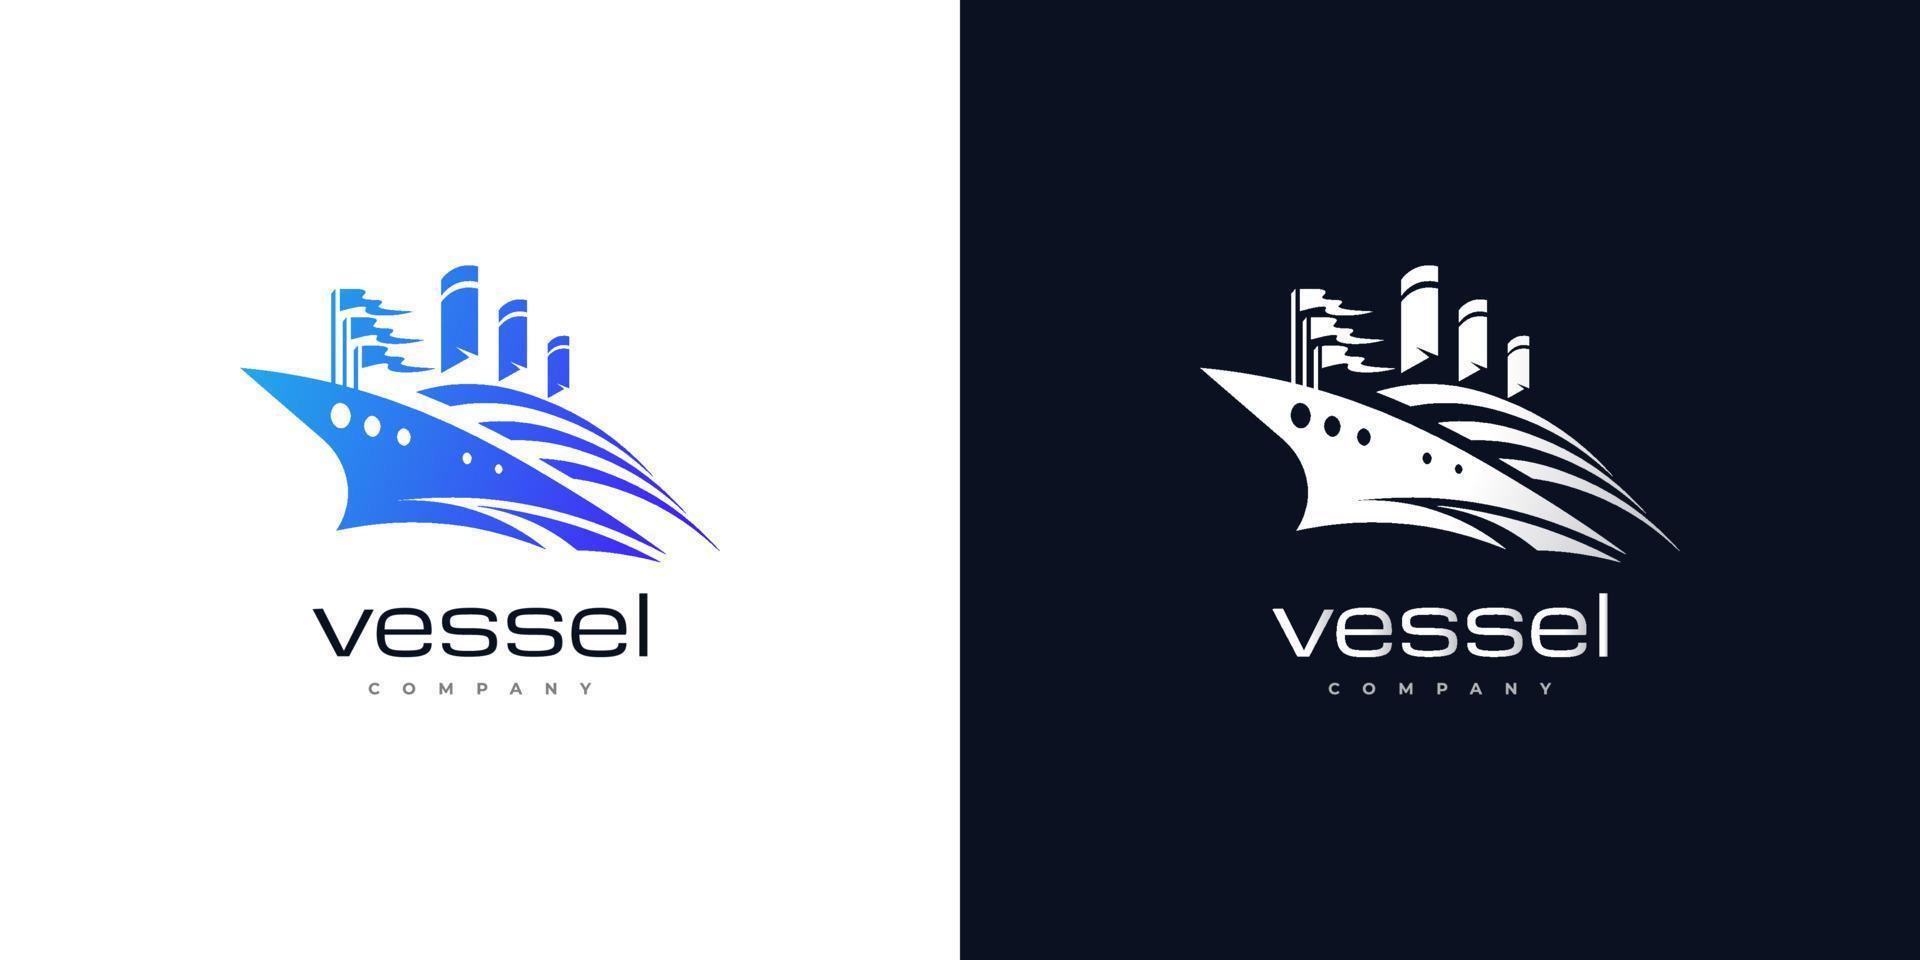 Modern and Clean Vessel Logo Design in Blue Gradient Style. Yacht, Cruise, Ship Logo or Icon vector